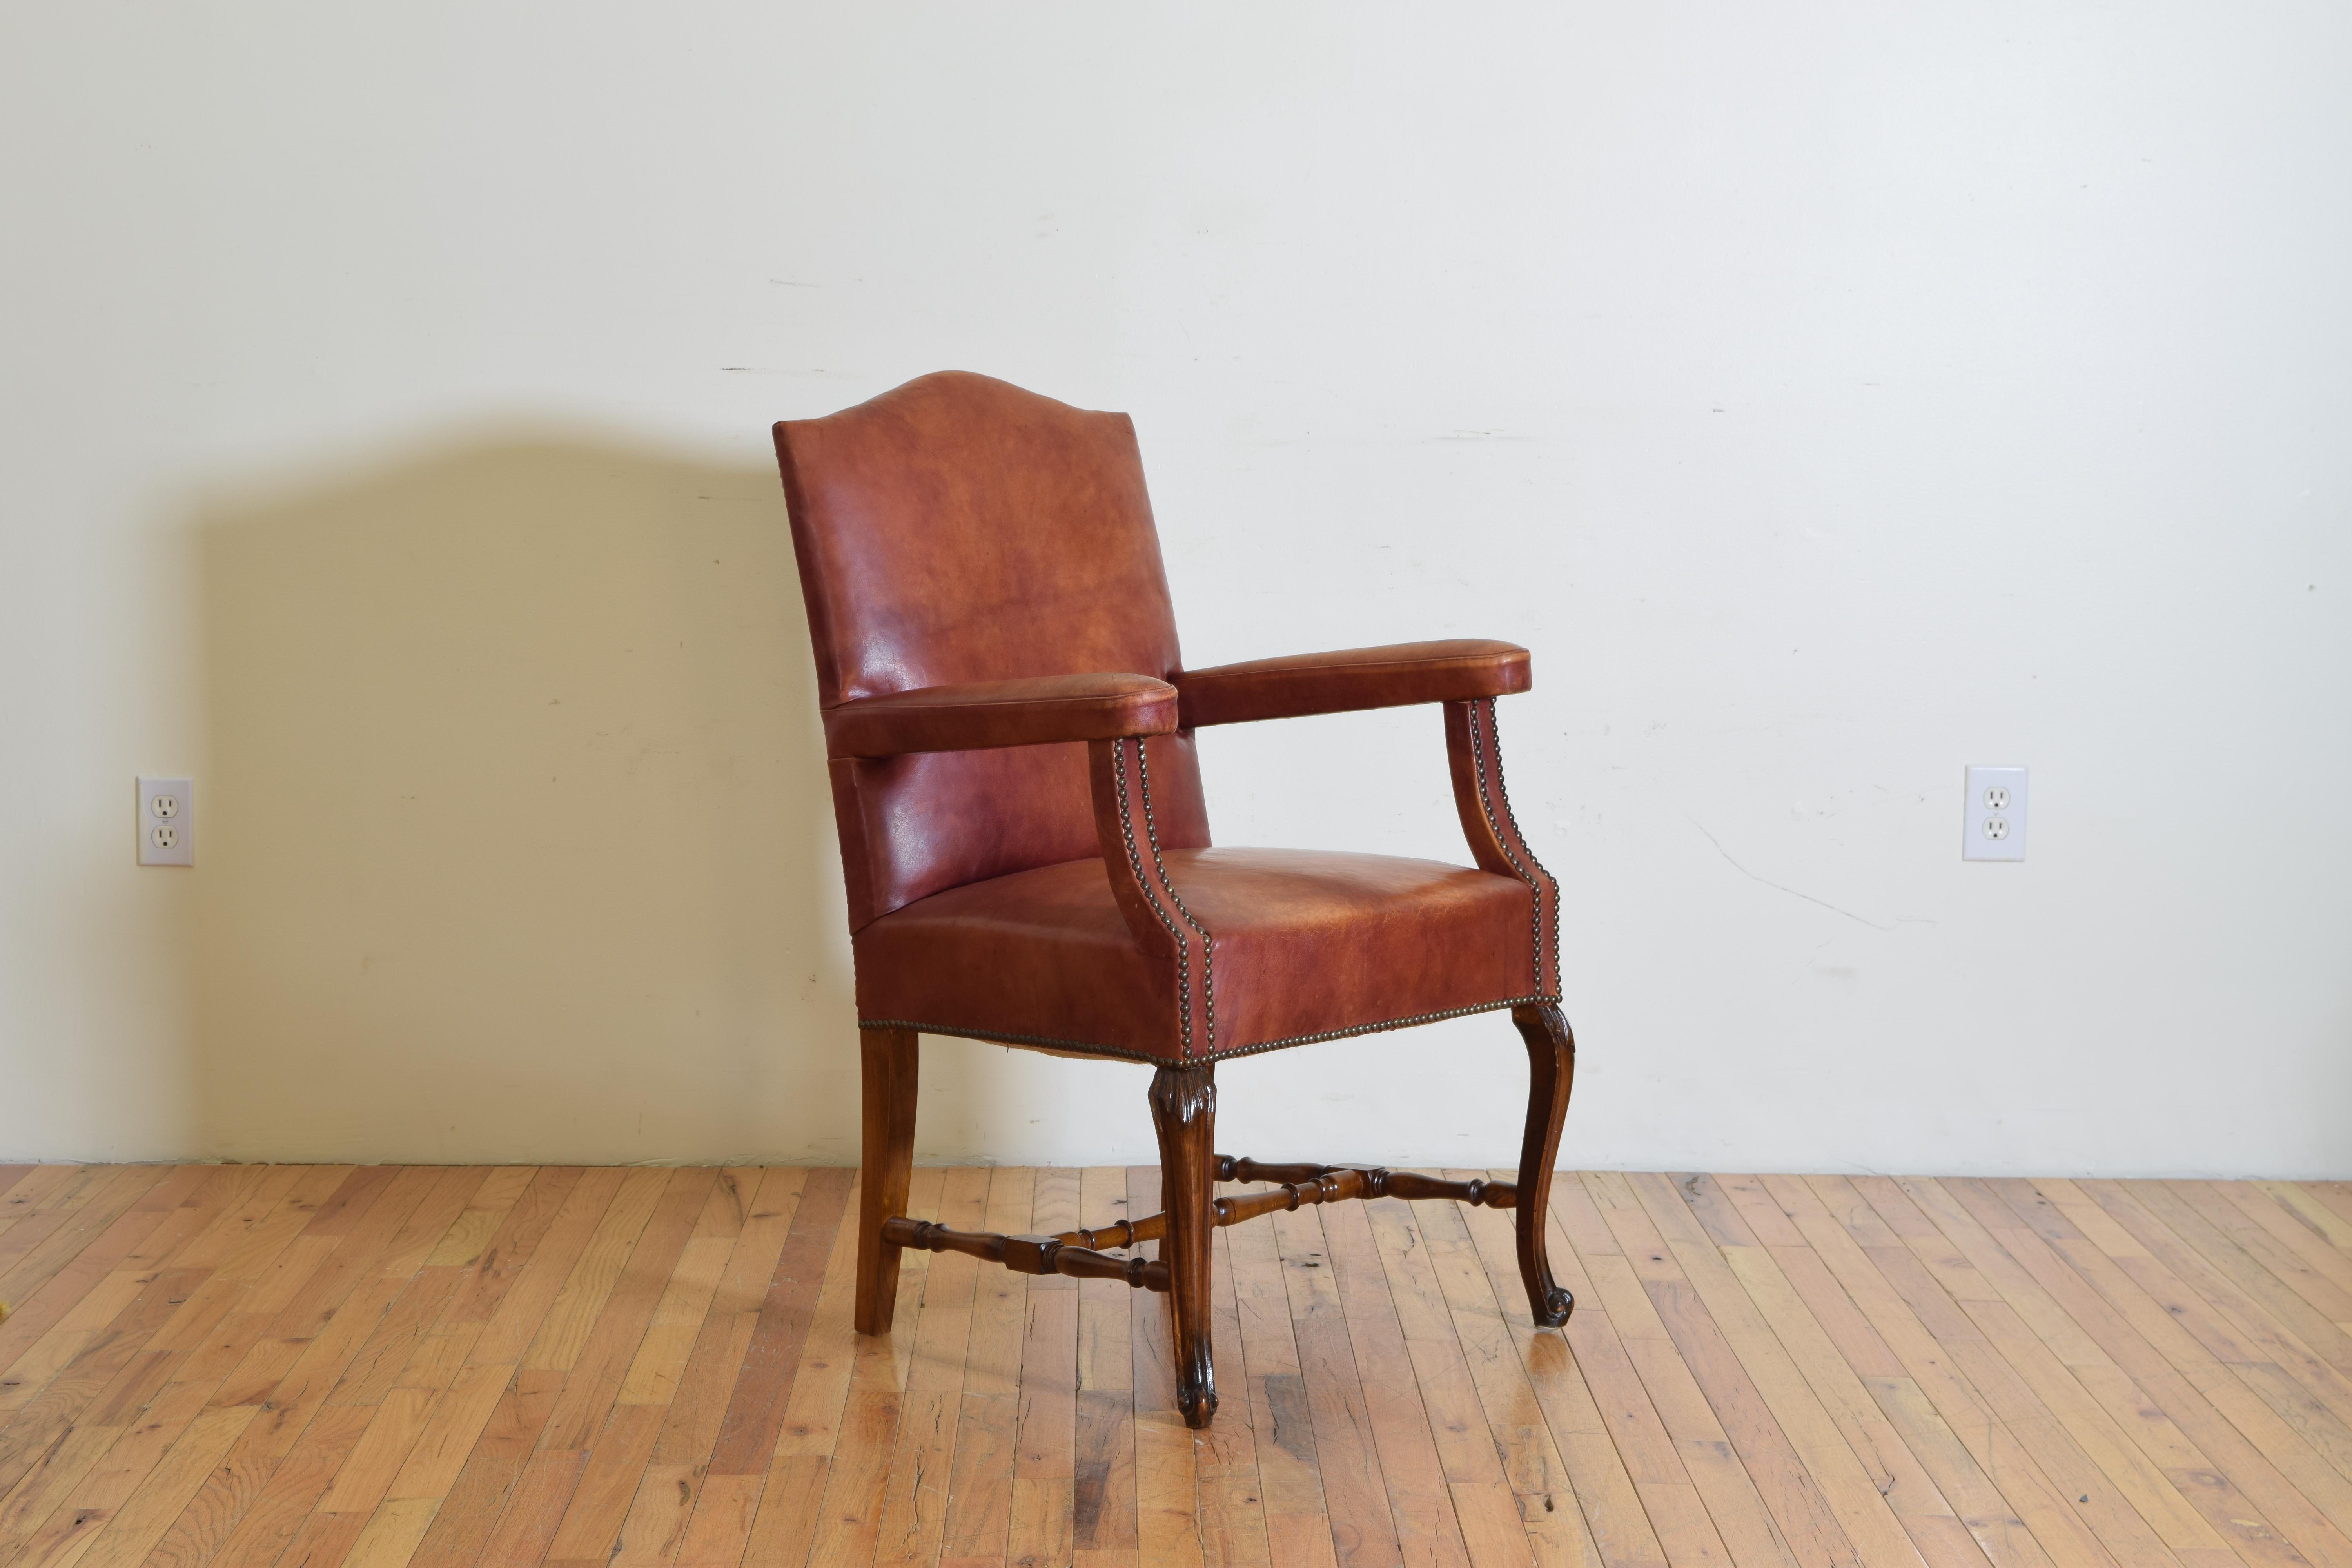 Having an arched backrest, upholstered arms, the walnut frame with slight cabriole legs joined by a turned stretcher, 1st half of the 20th century.